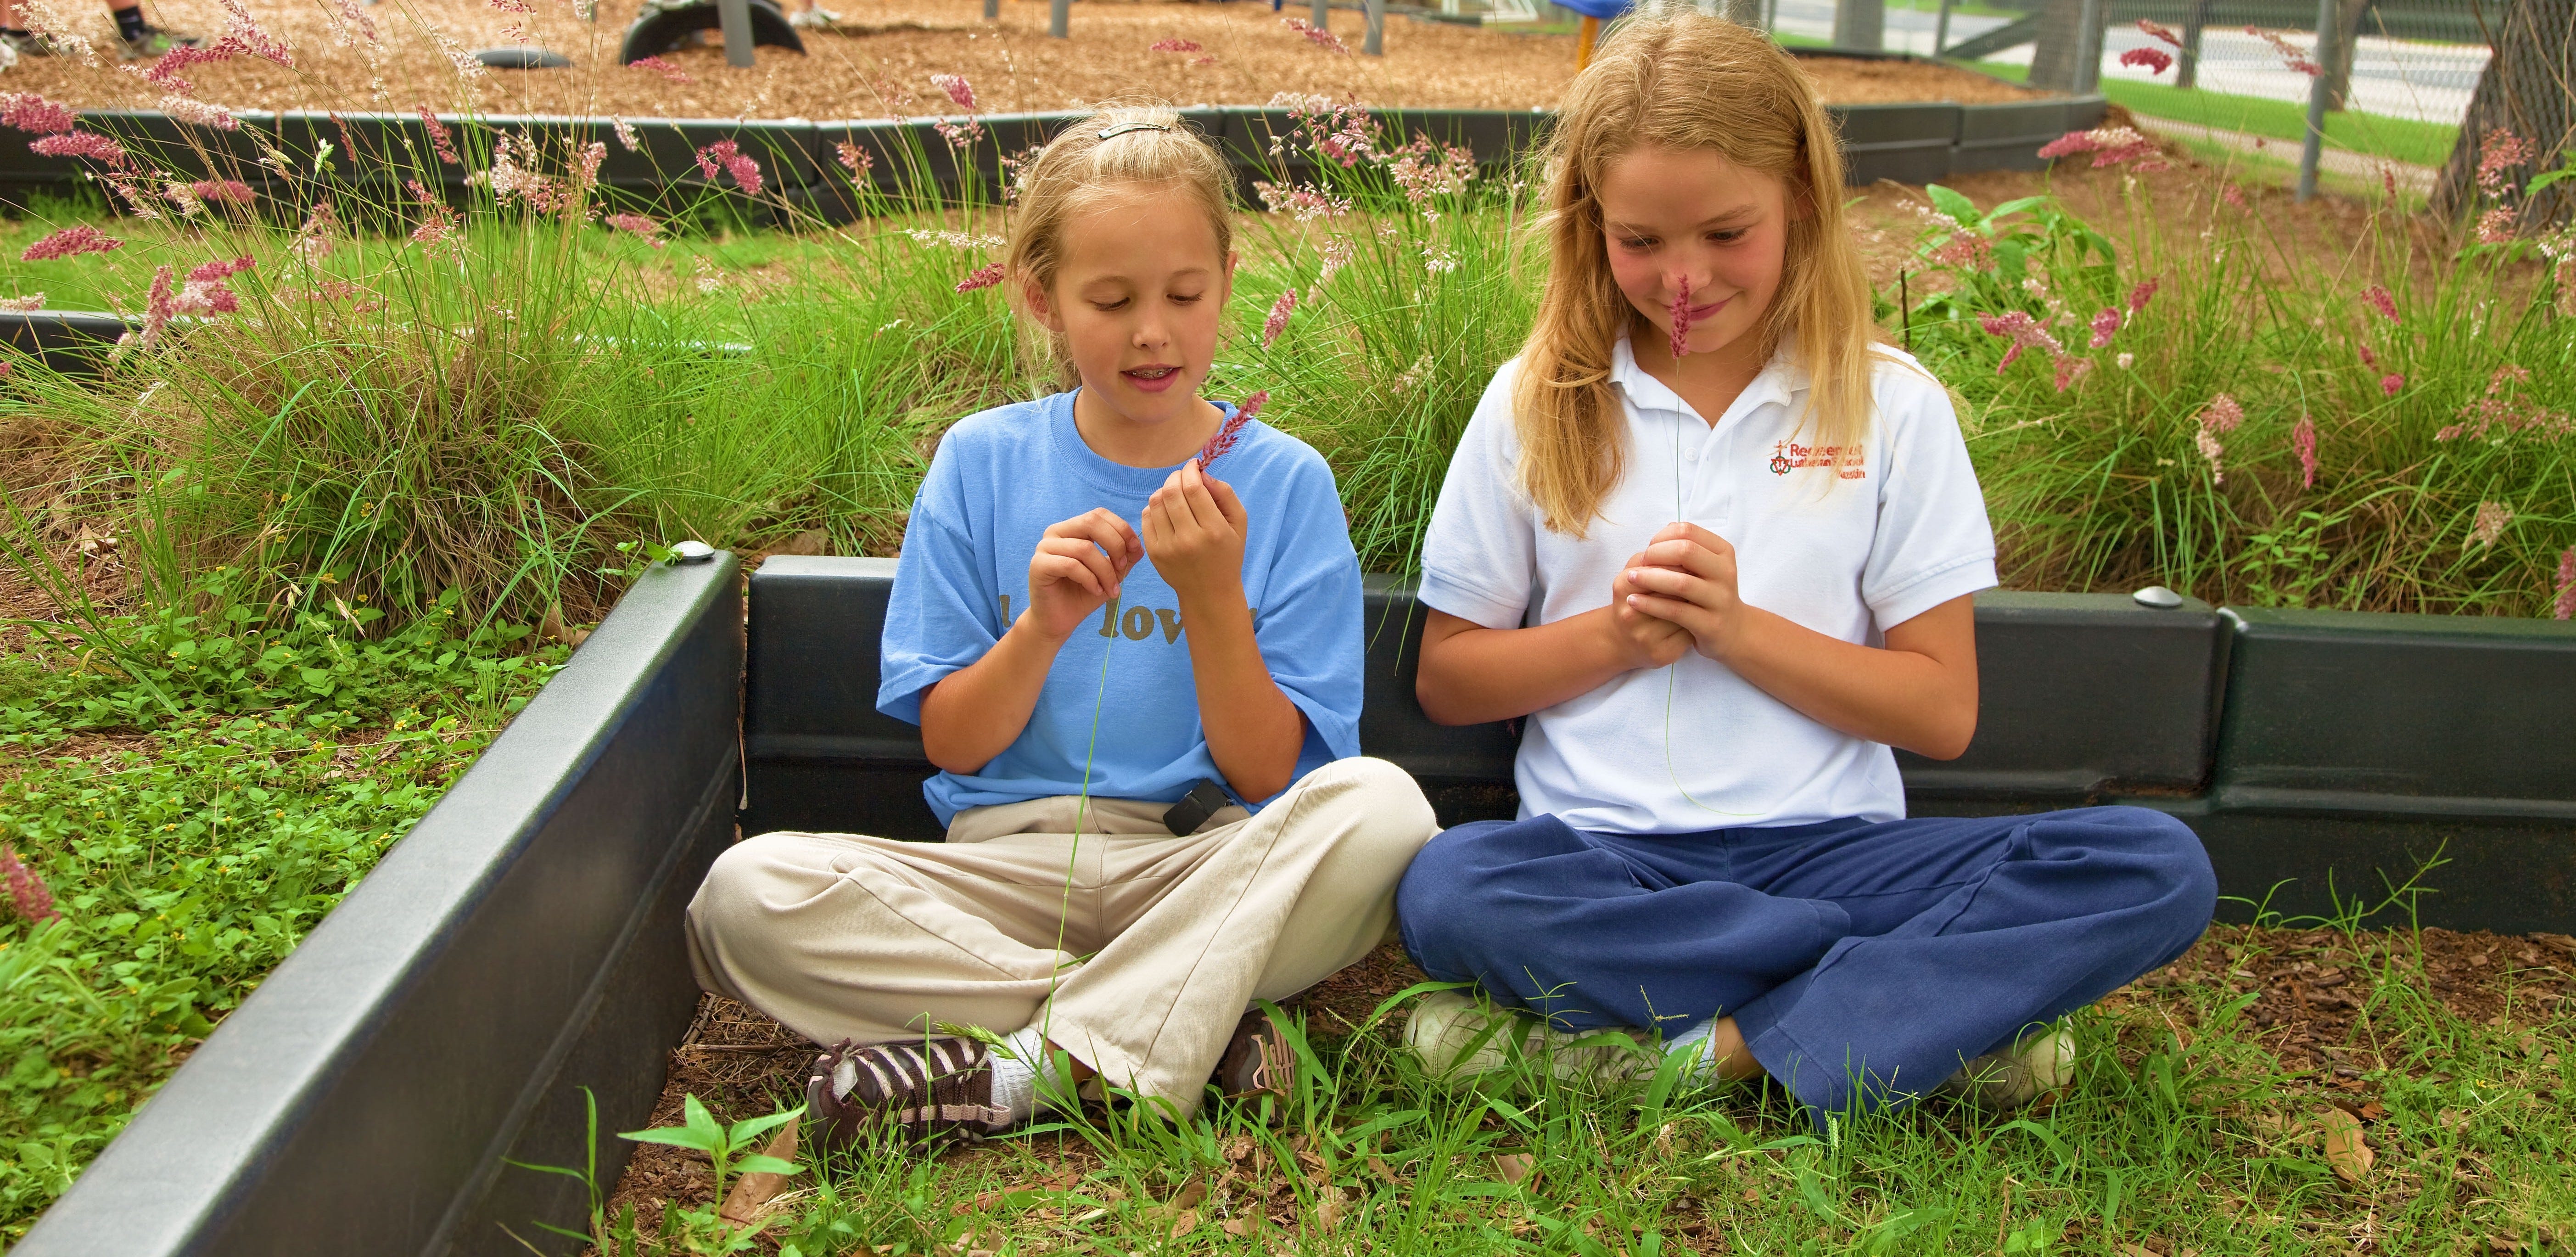 Creating Opportunities for Outdoor Education